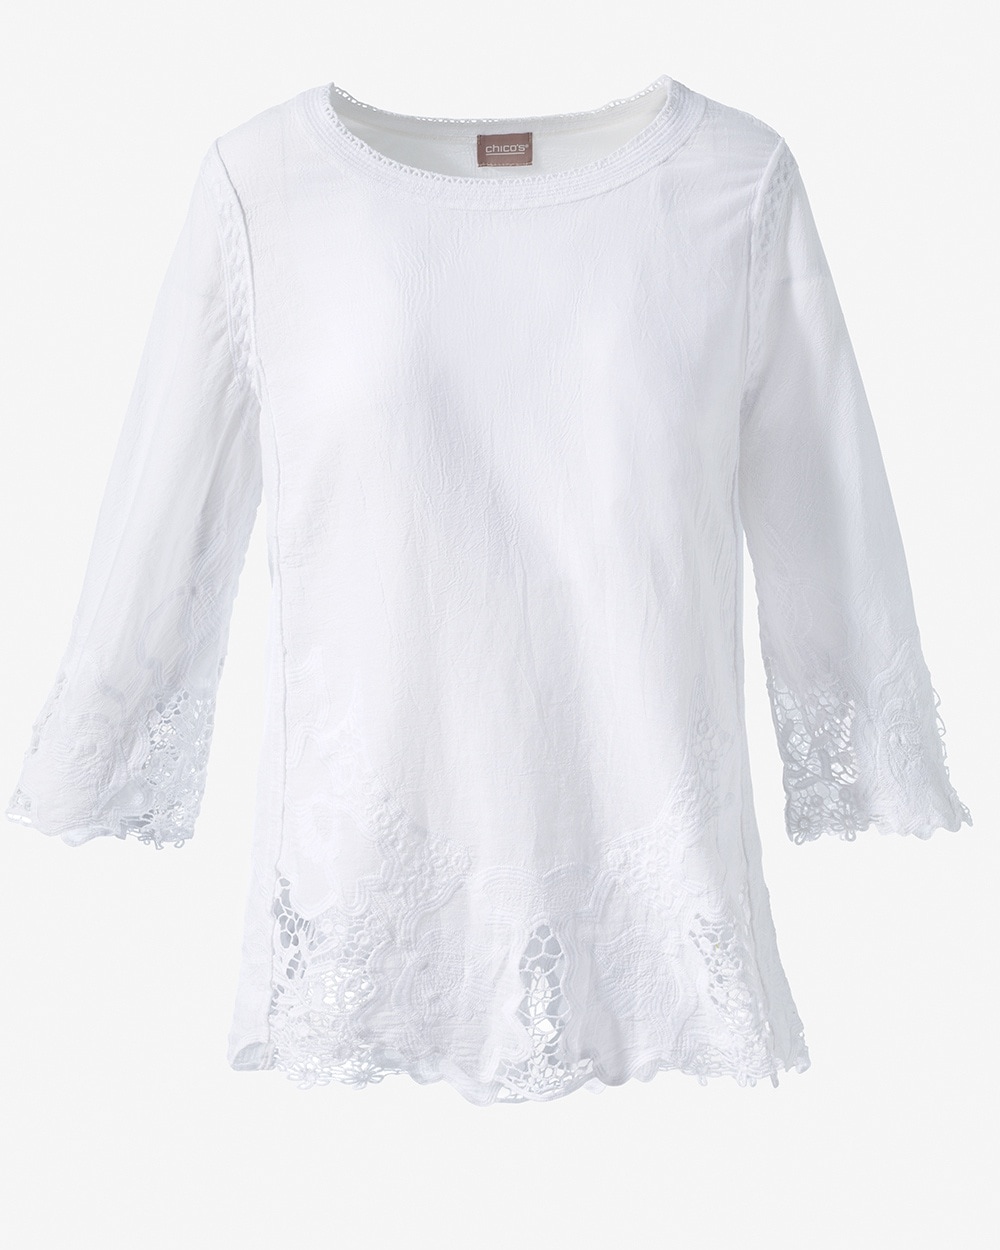 Embroidered Scallop-Hem Top